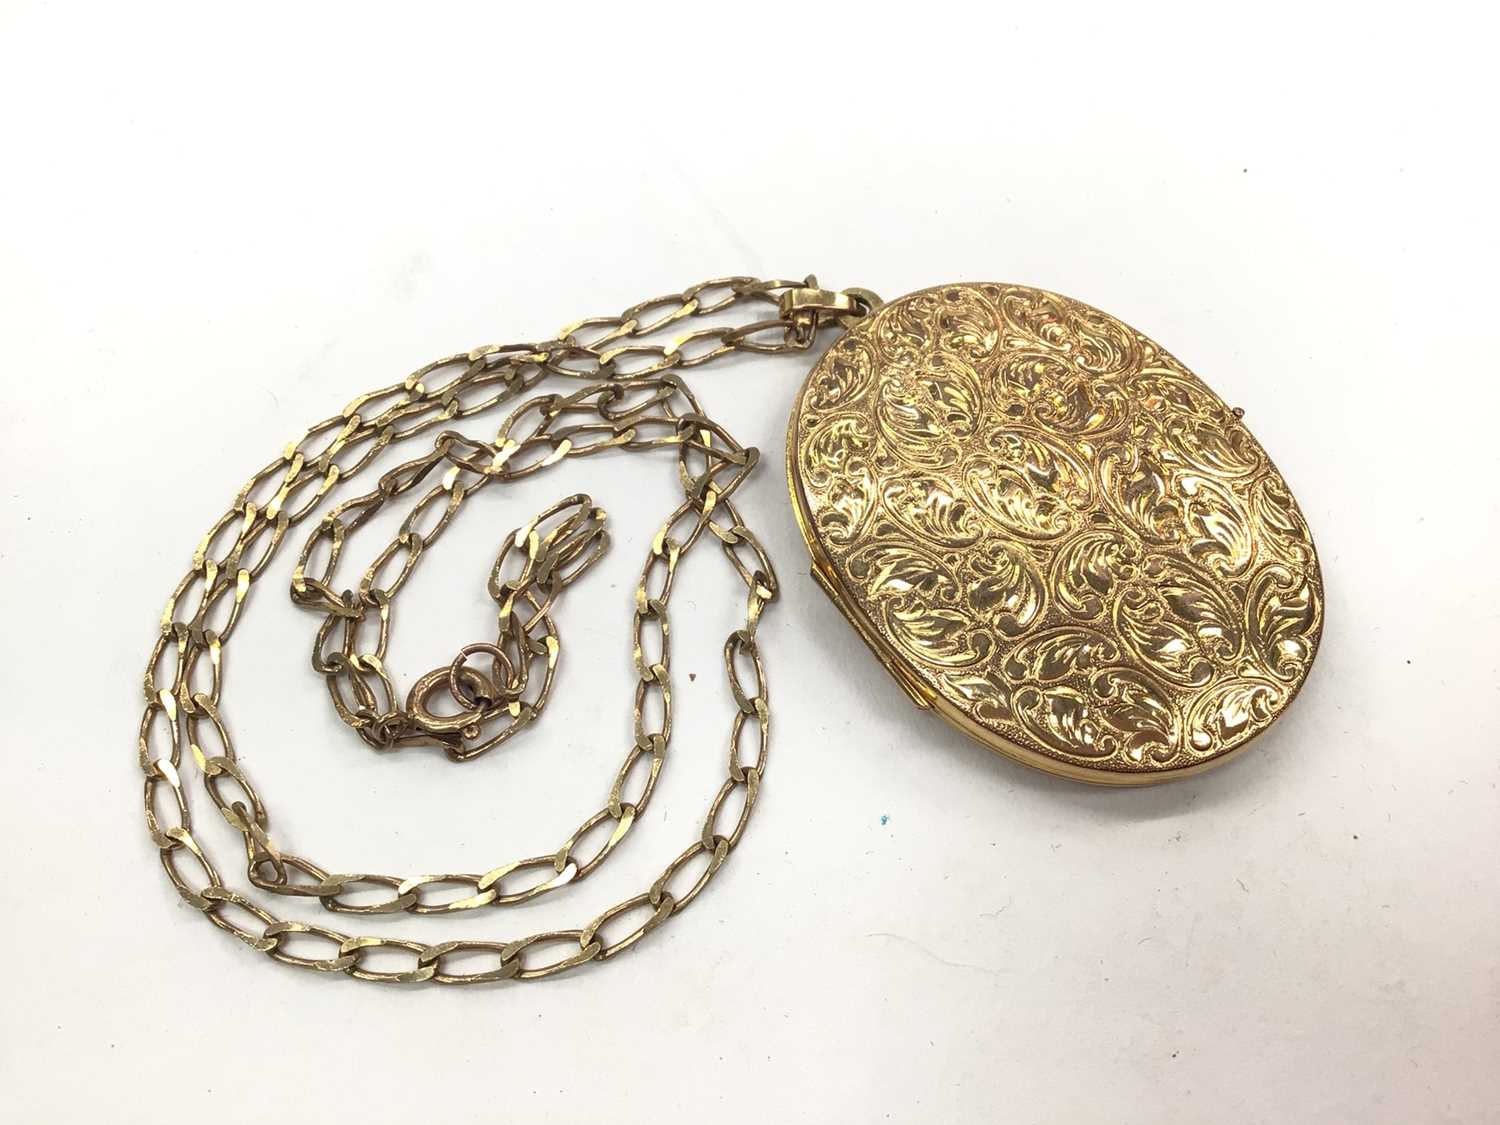 9ct gold oval locket on 9ct gold chain, three 9ct gold mounted glass lockets and a gold plated coin - Image 2 of 2